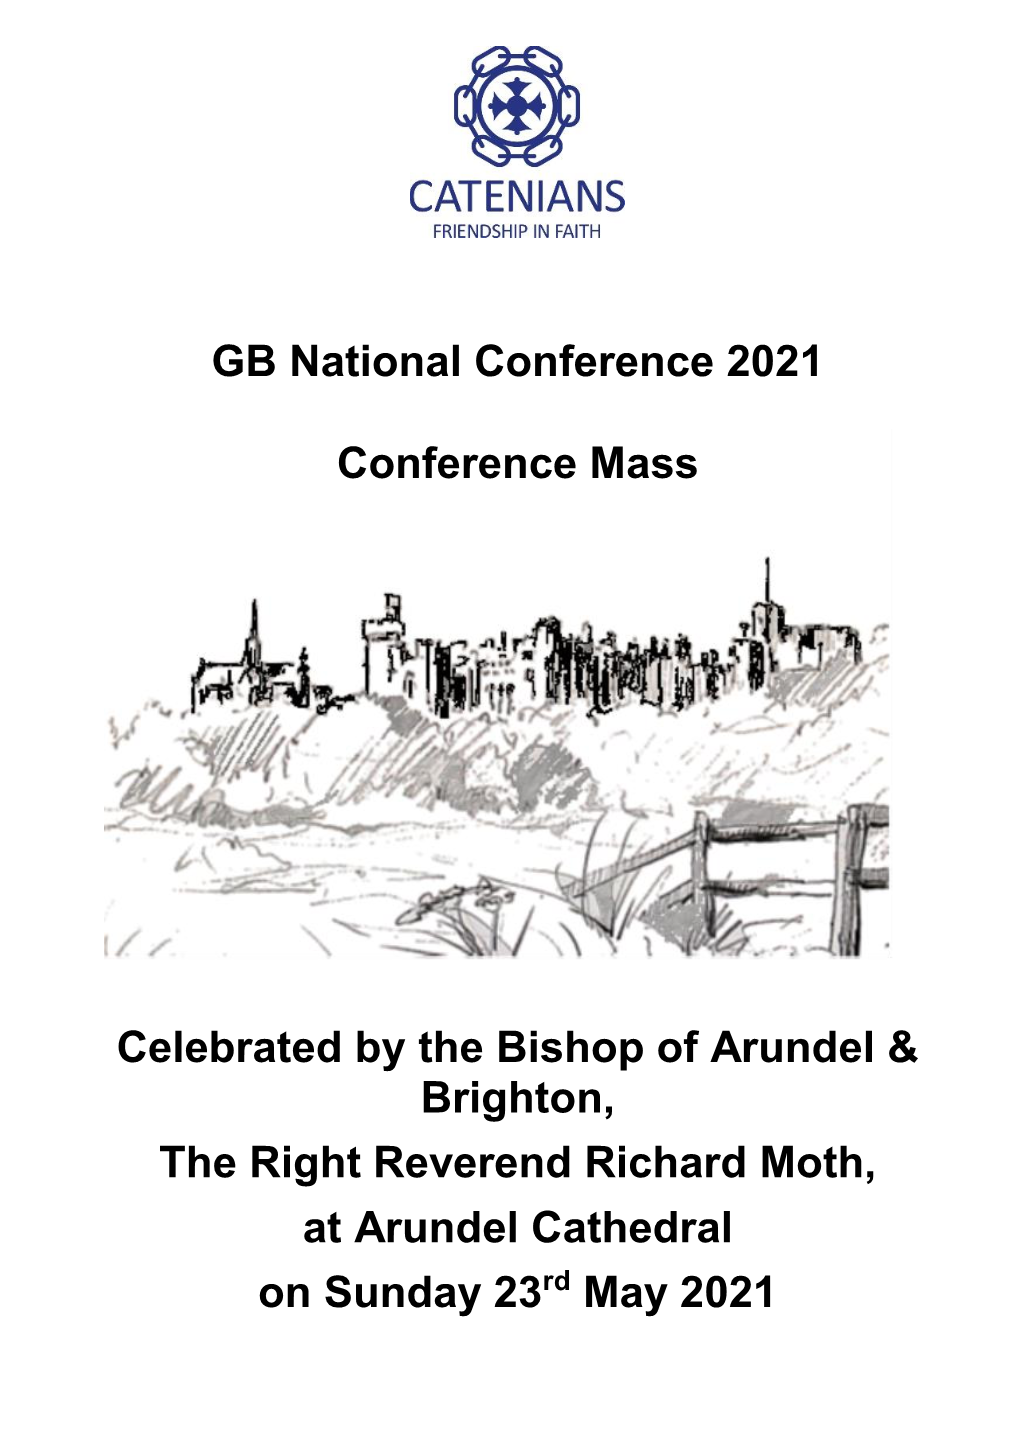 GB National Conference 2021 Conference Mass